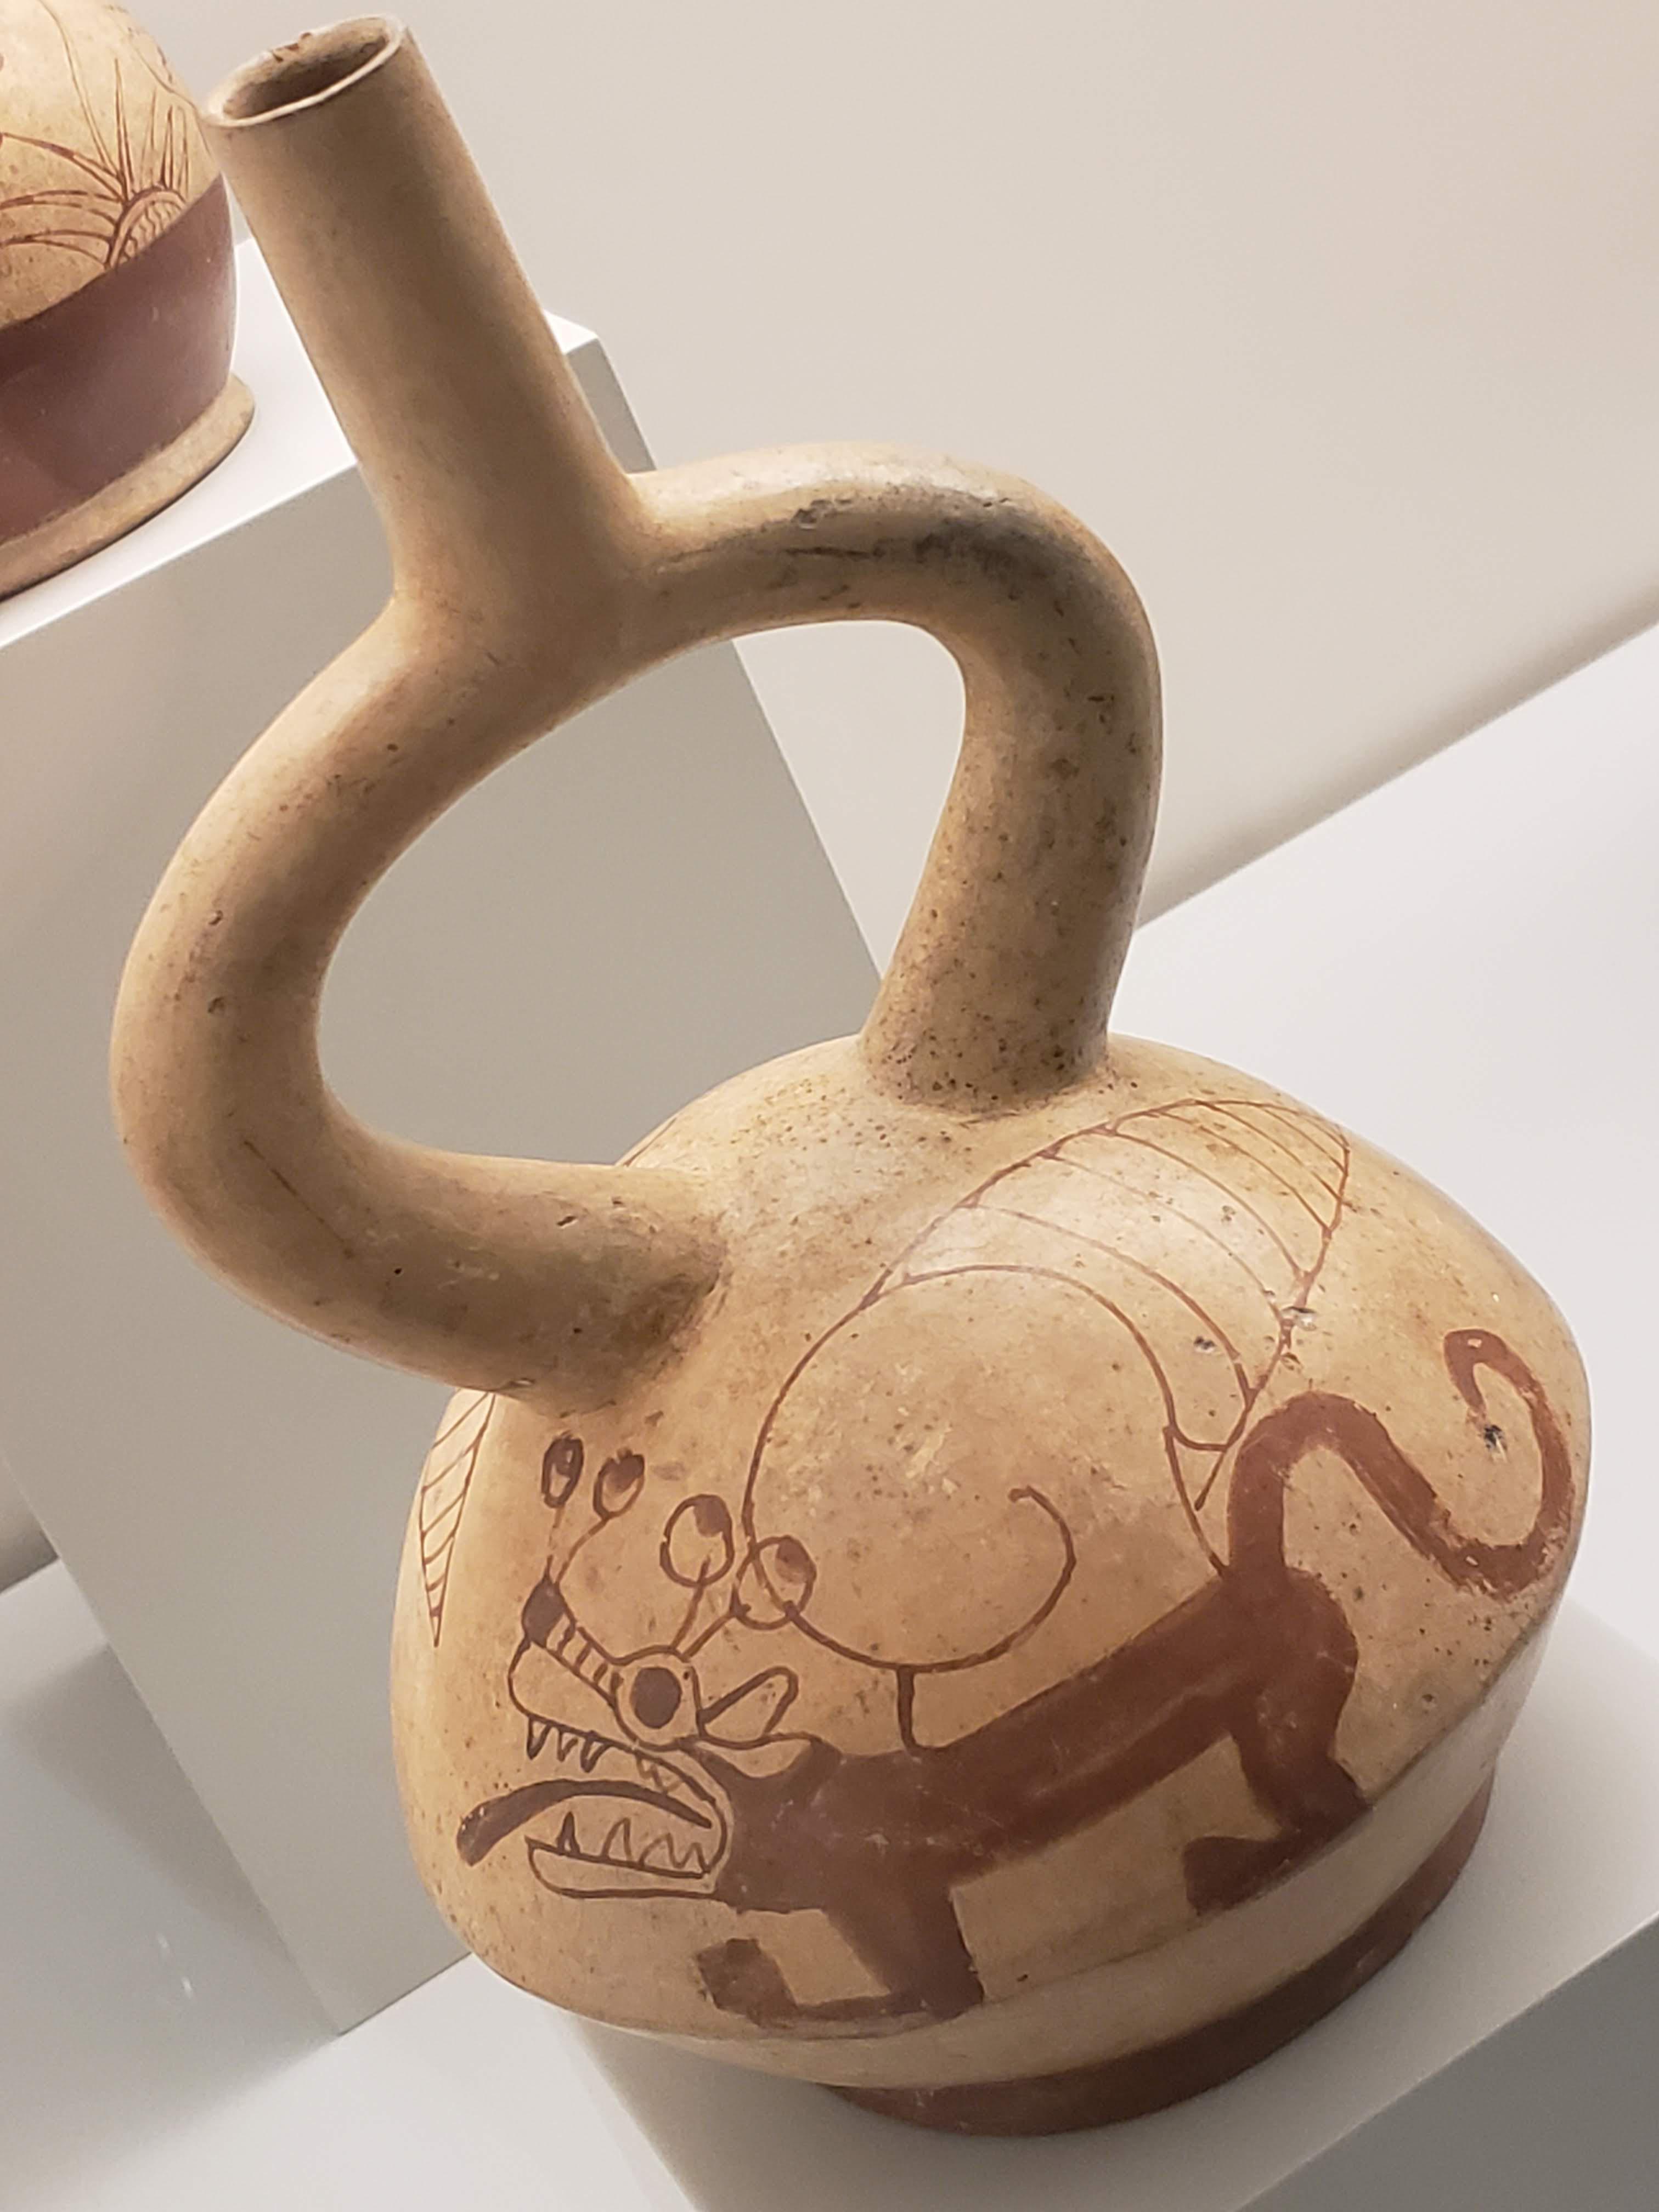 Painted ceramic vessel depicting a creature with feline features and a snail-like shell, possibly related to an origin myth. Moche culture, Peru, ca. 100 BC - 700 AD. Museo de América, Madrid.jpg